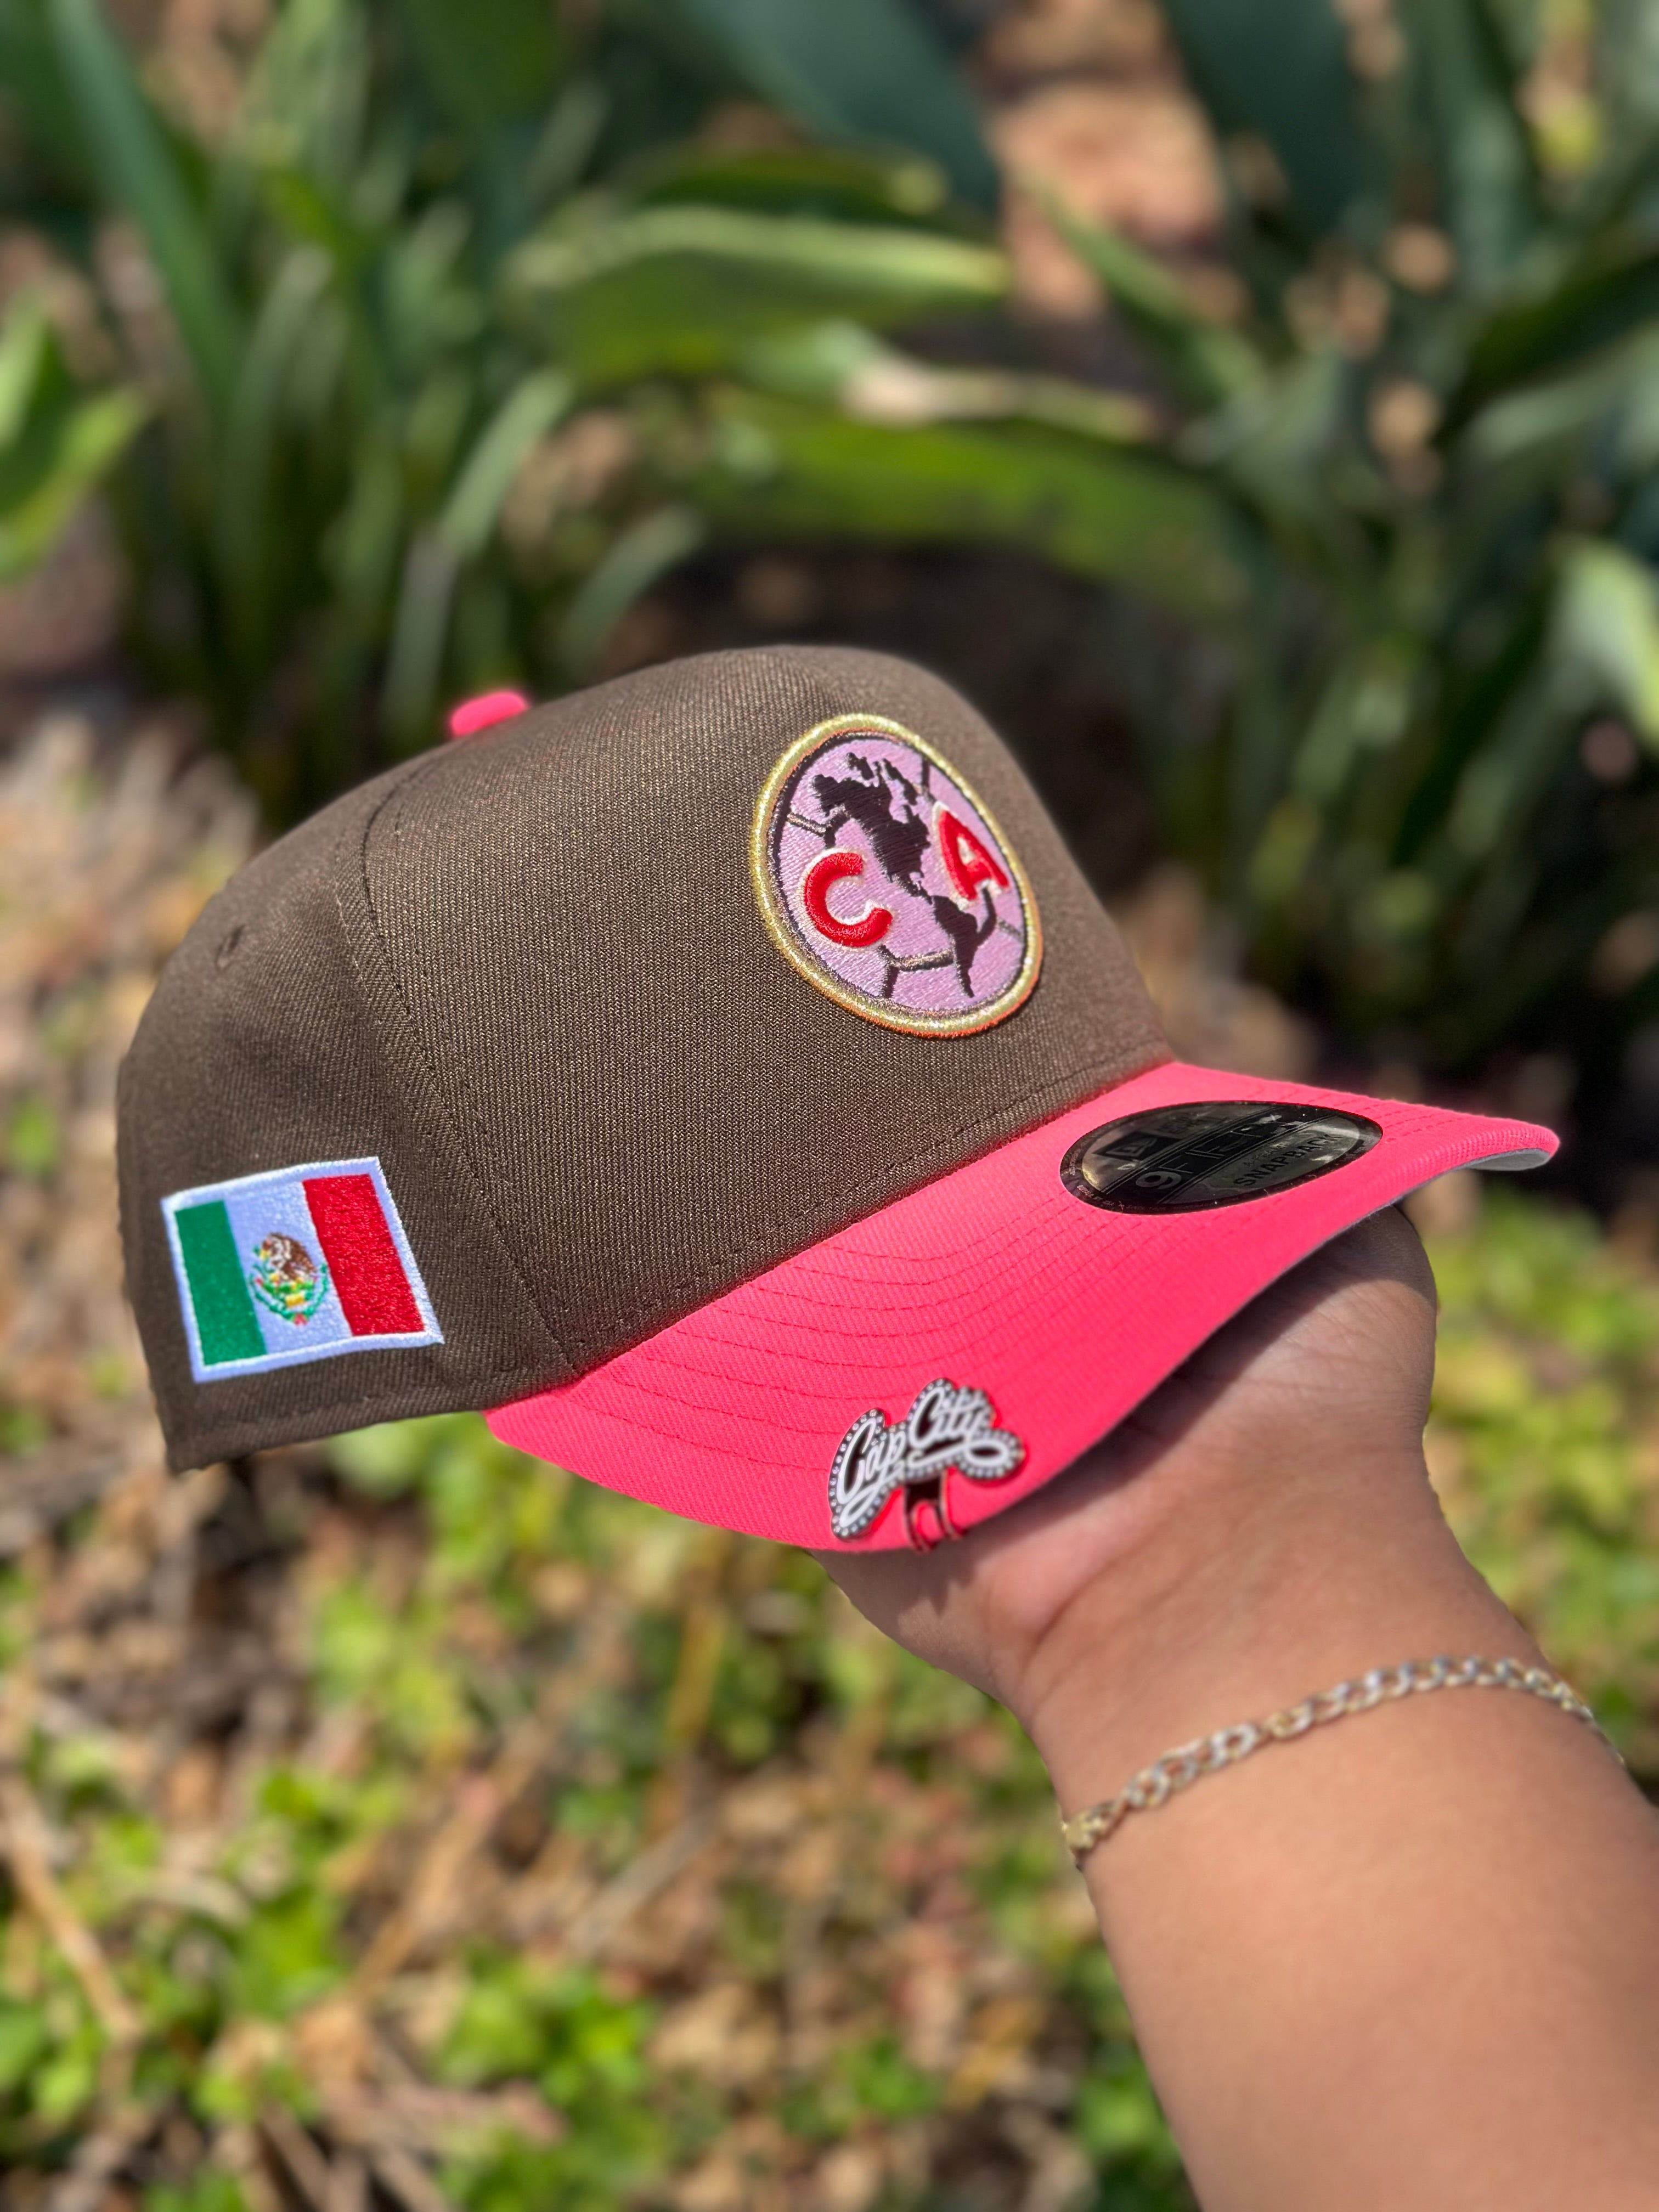 NEW ERA EXCLUSIVE 9FIFTY A-FRAME MOCHA/NEON PINK "CLUB AMERICA" SNAPBACK W/ MEXICO FLAG SIDE PATCH